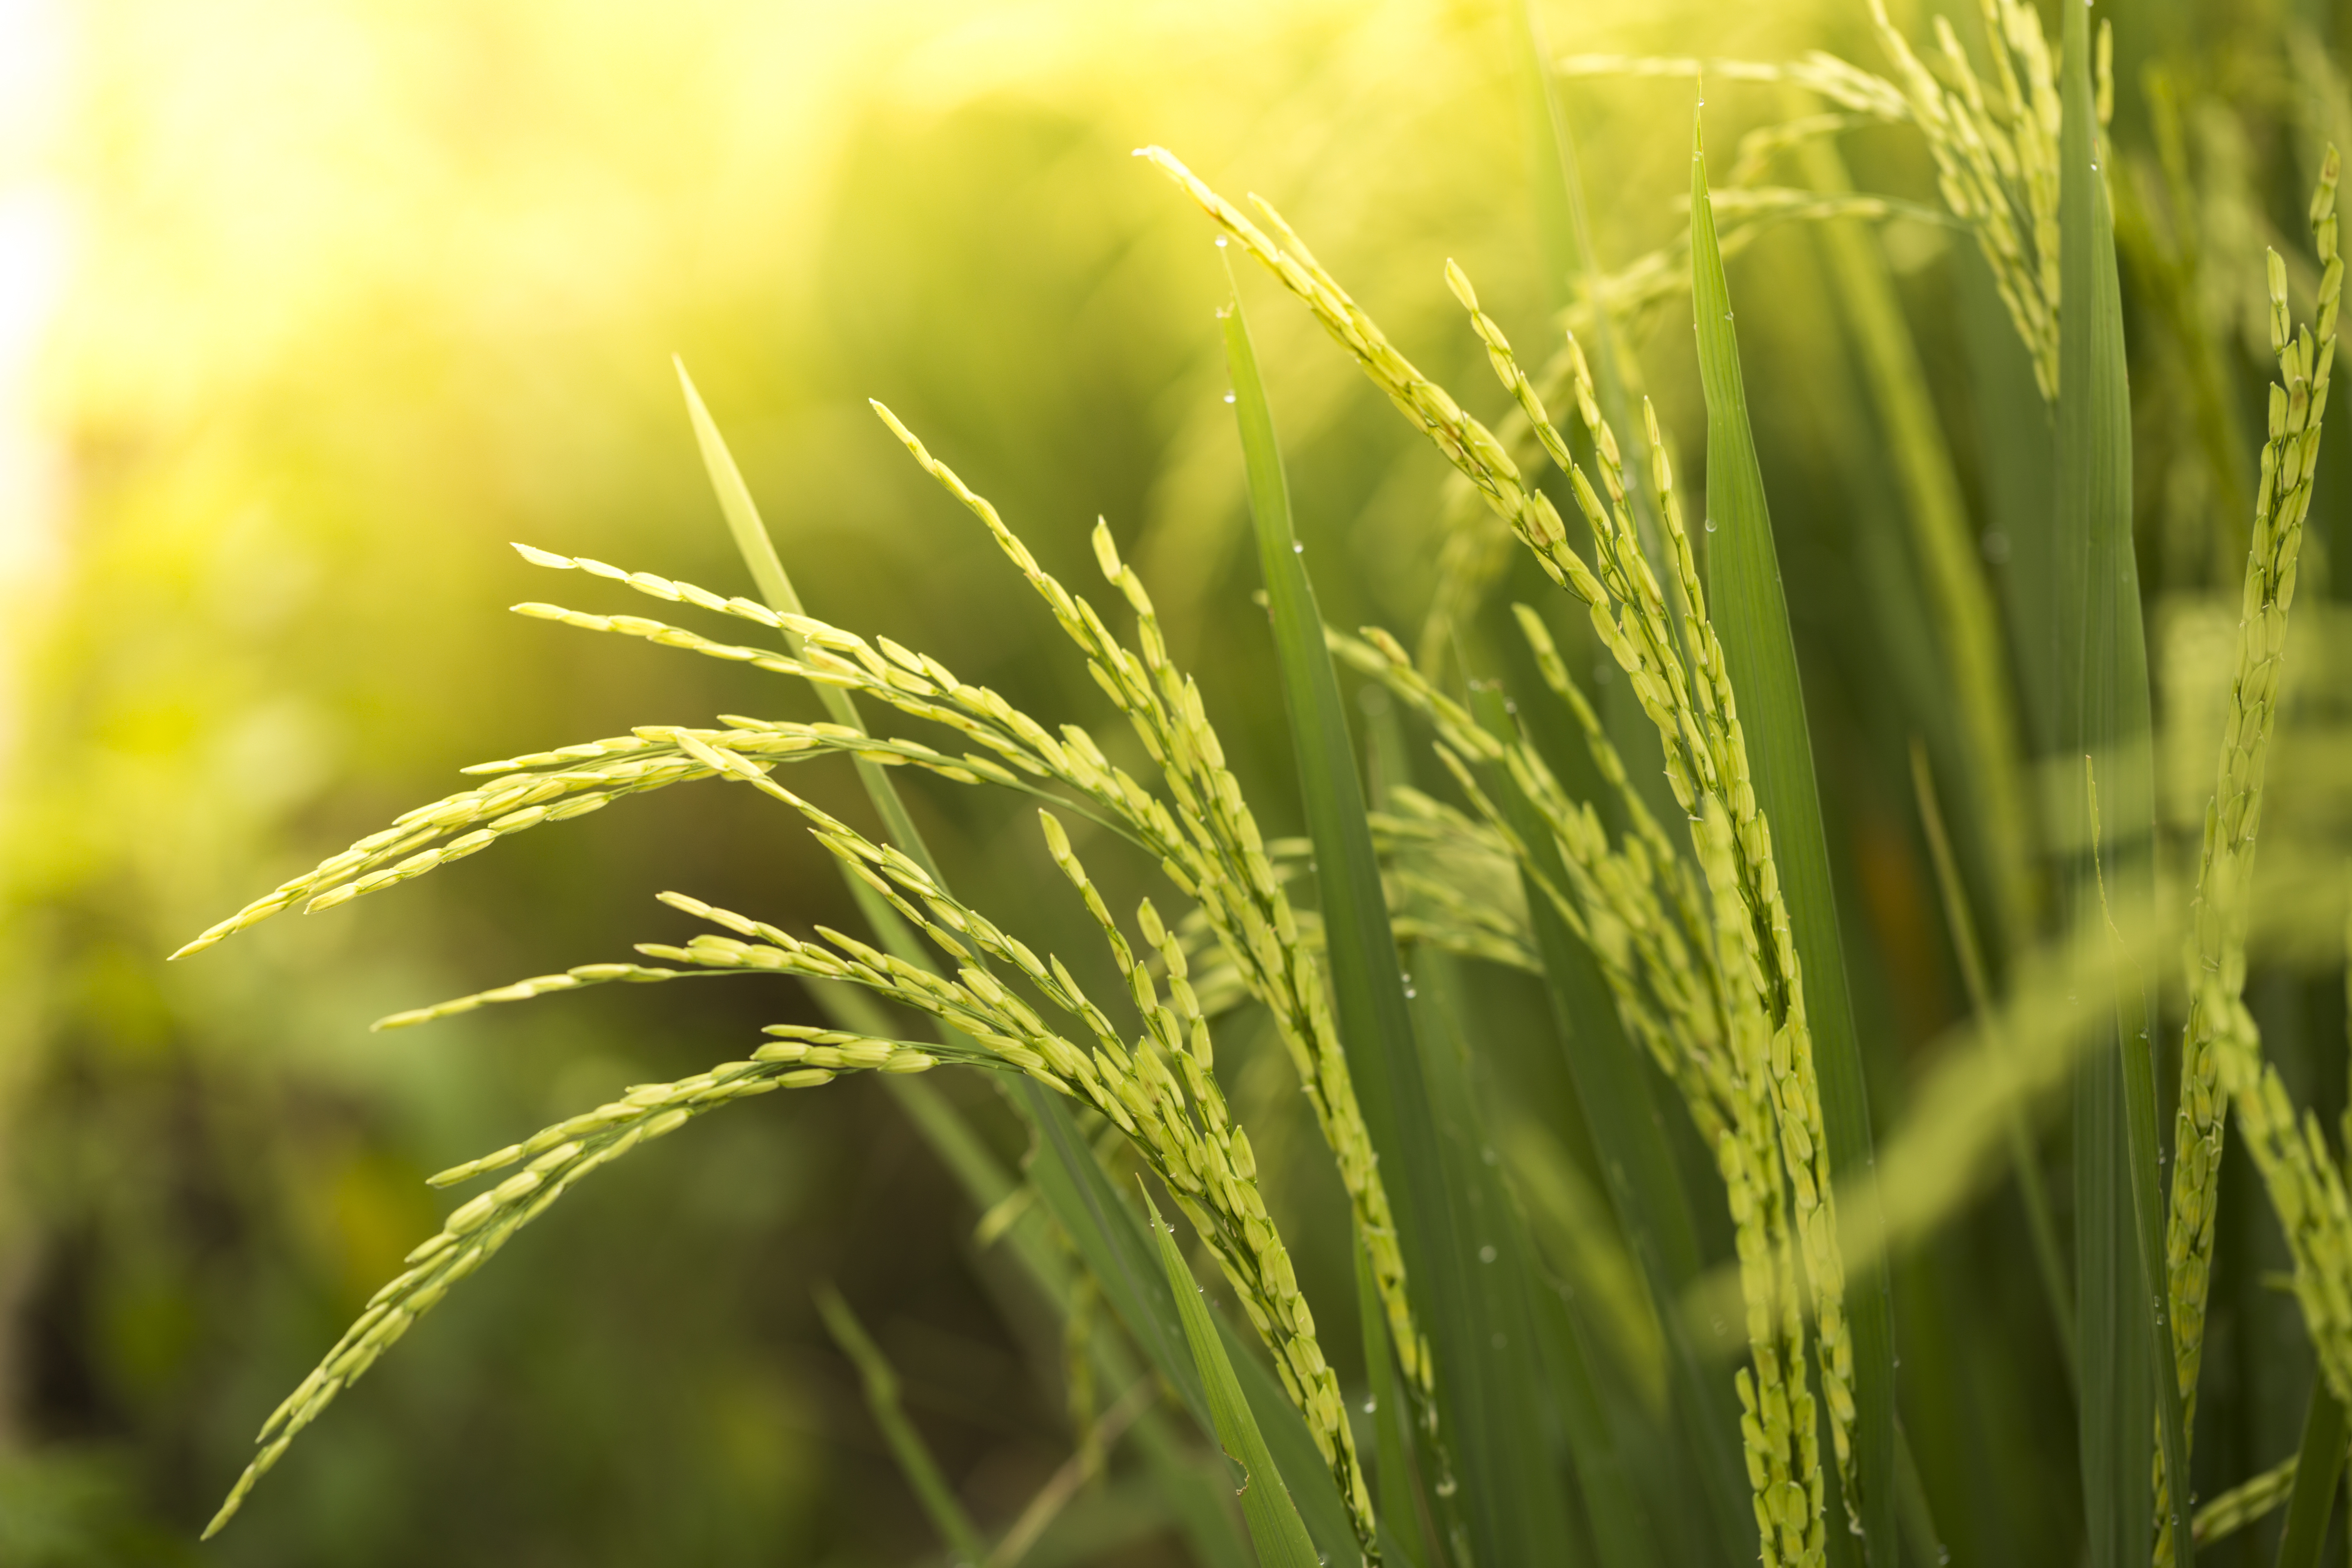 Anheuser-Busch and USA Rice Partner to Support Sustainable Rice Farming